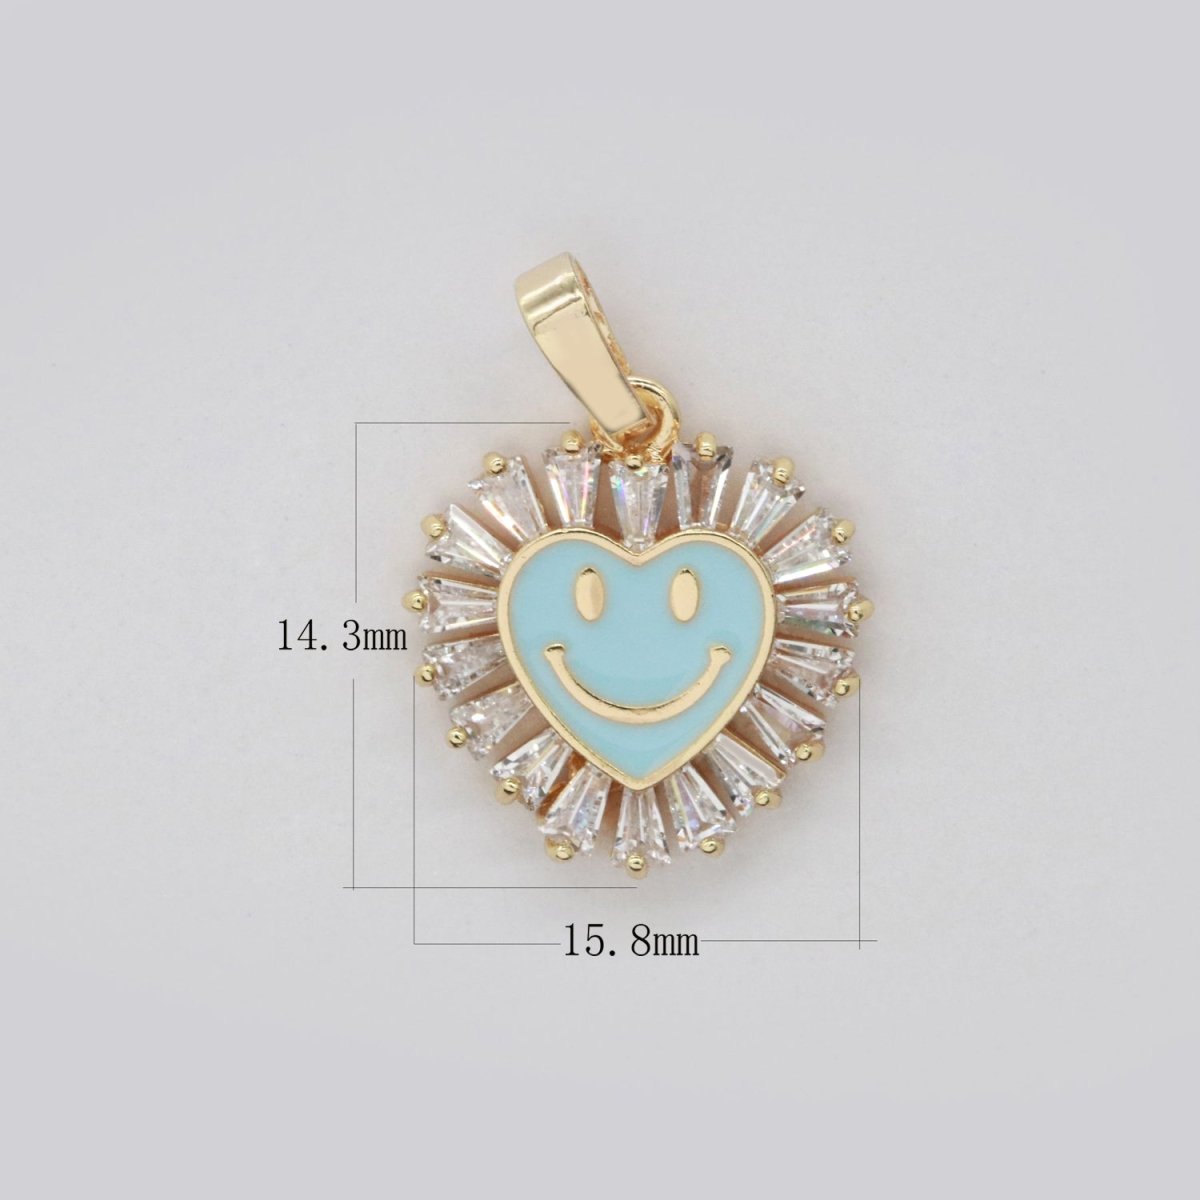 Heart Smiley Face Charm Cubic Happy Face Pendant for Necklace Earring Component I-276 I-277 I-287 I-292 I-293 I-298 - DLUXCA